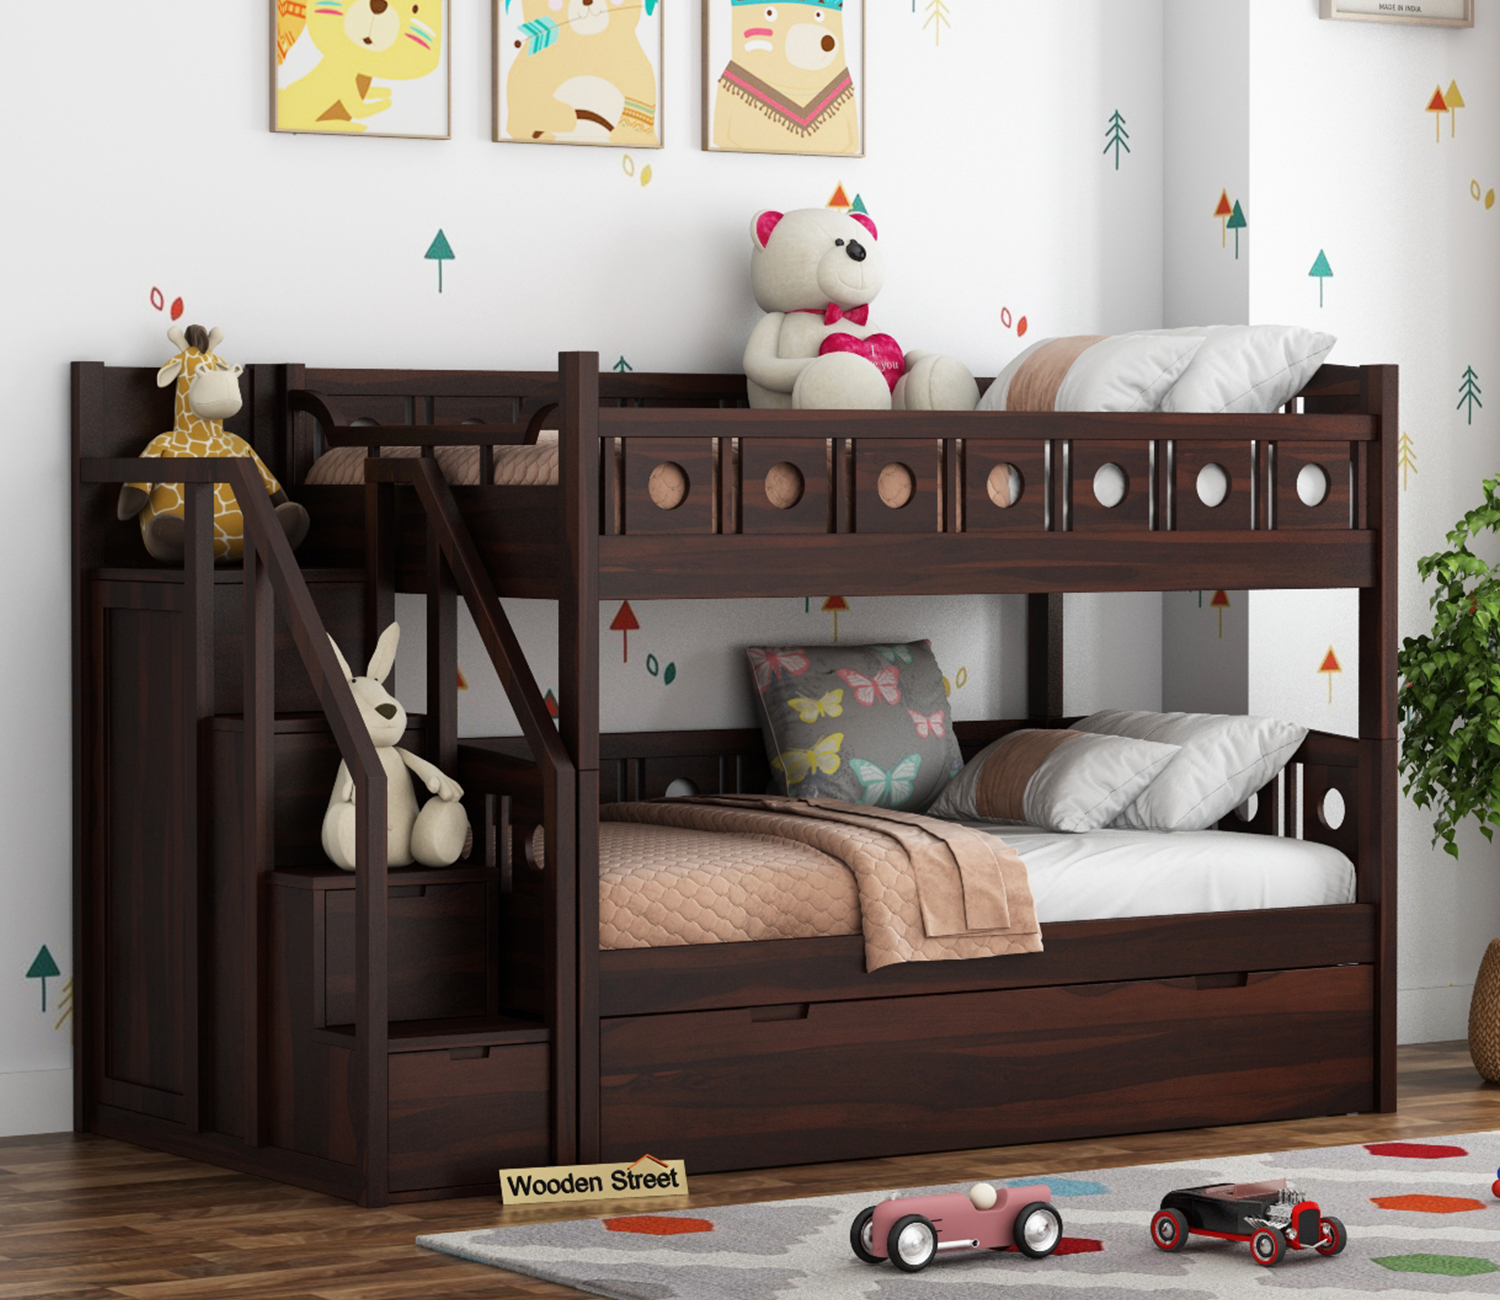 10 Best Twin Over Full Bunk Beds Options for Kids - Meredith Plays